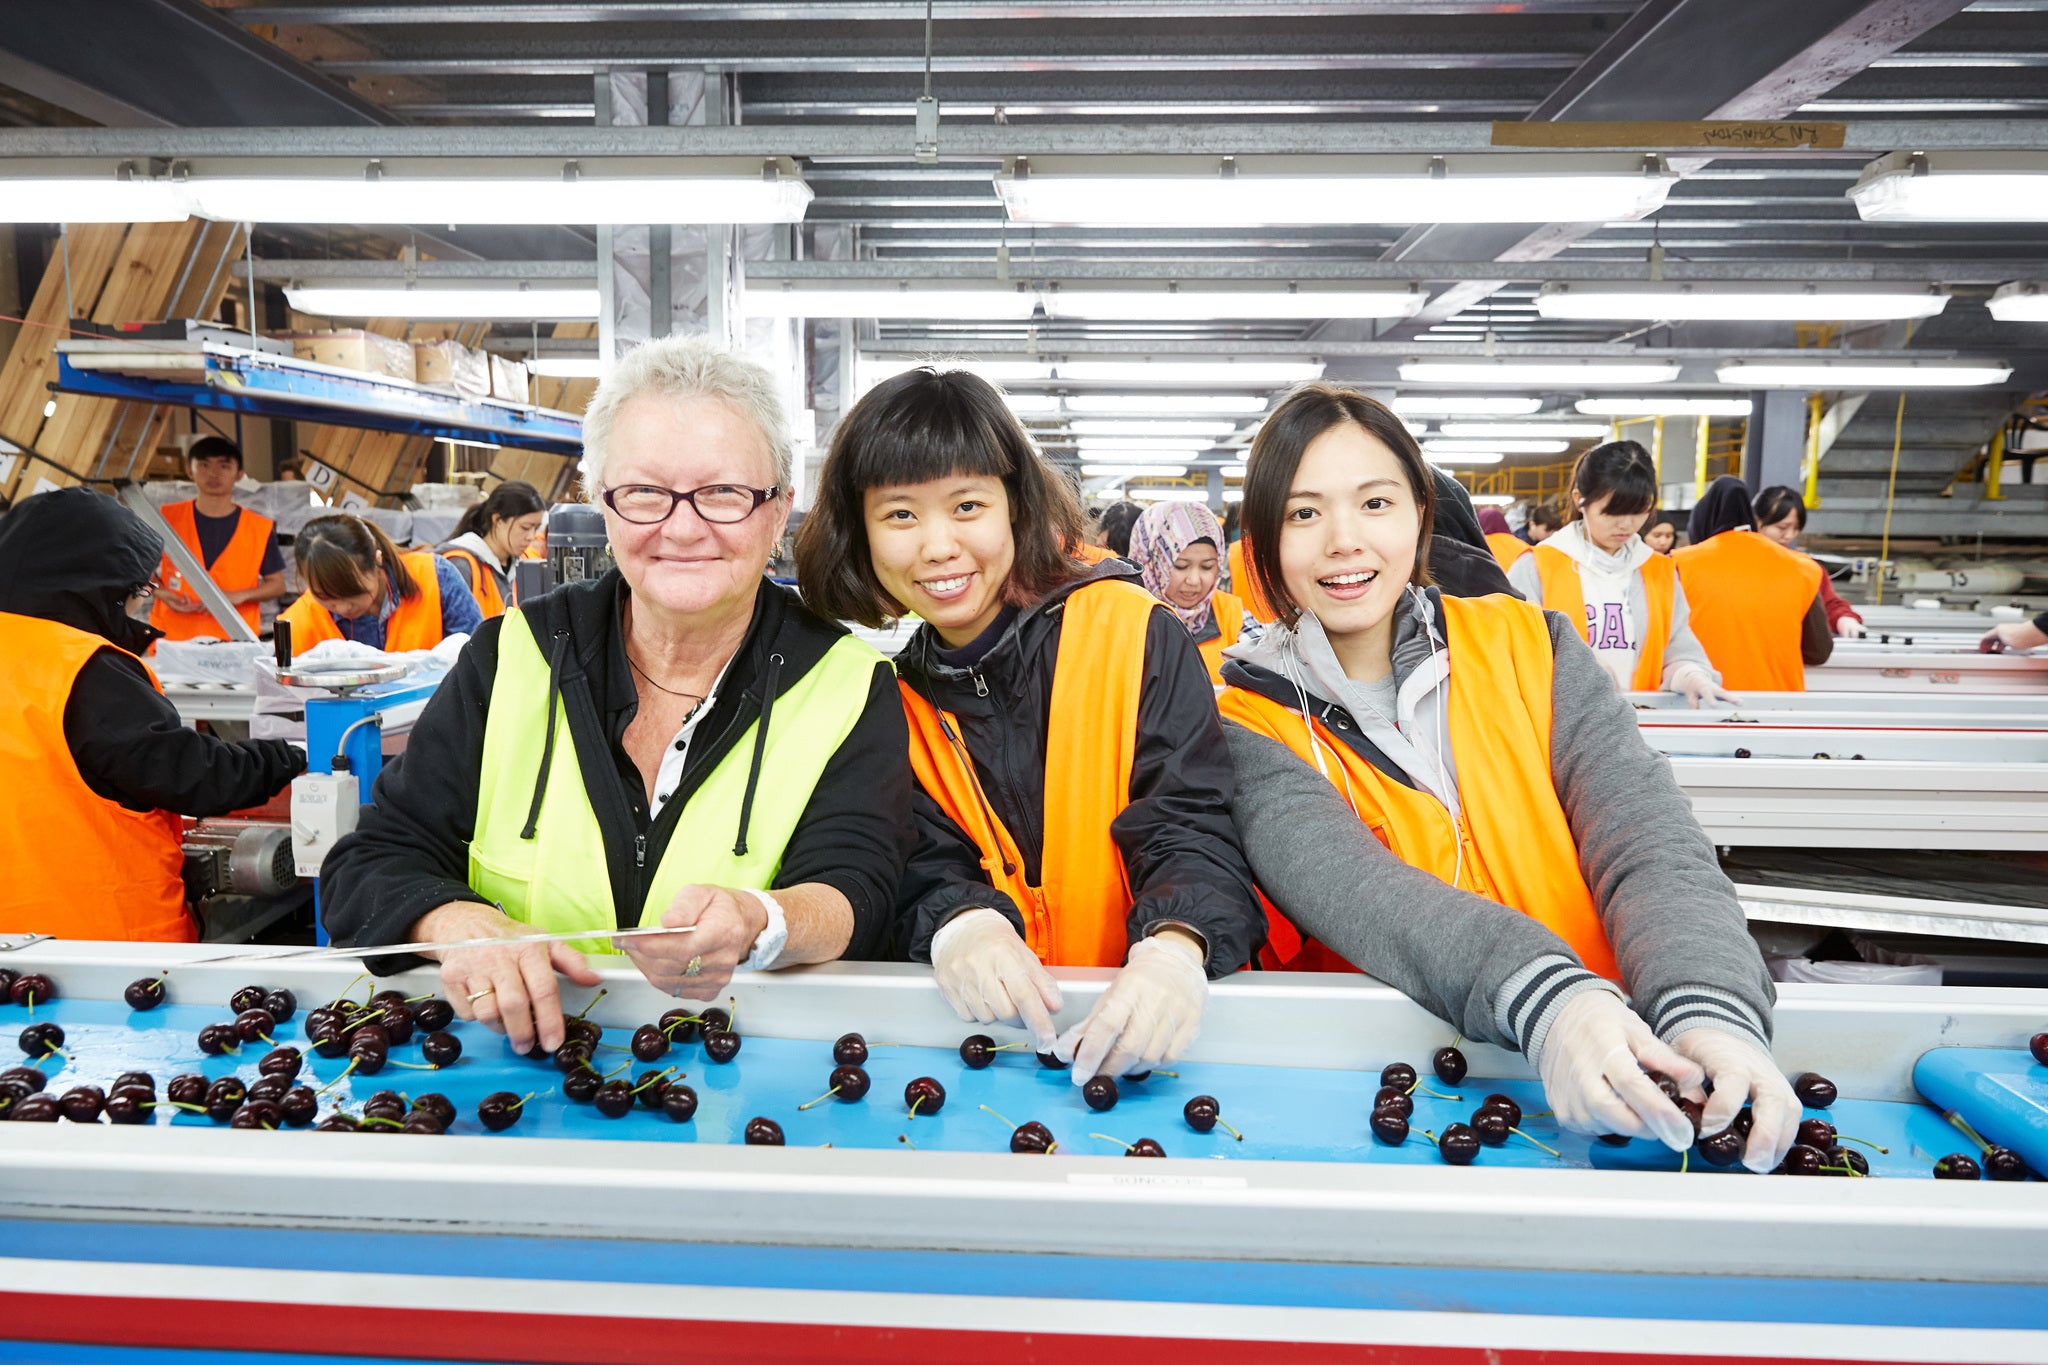 Koala Cherries employees smiling sorting cherries in the packing shed